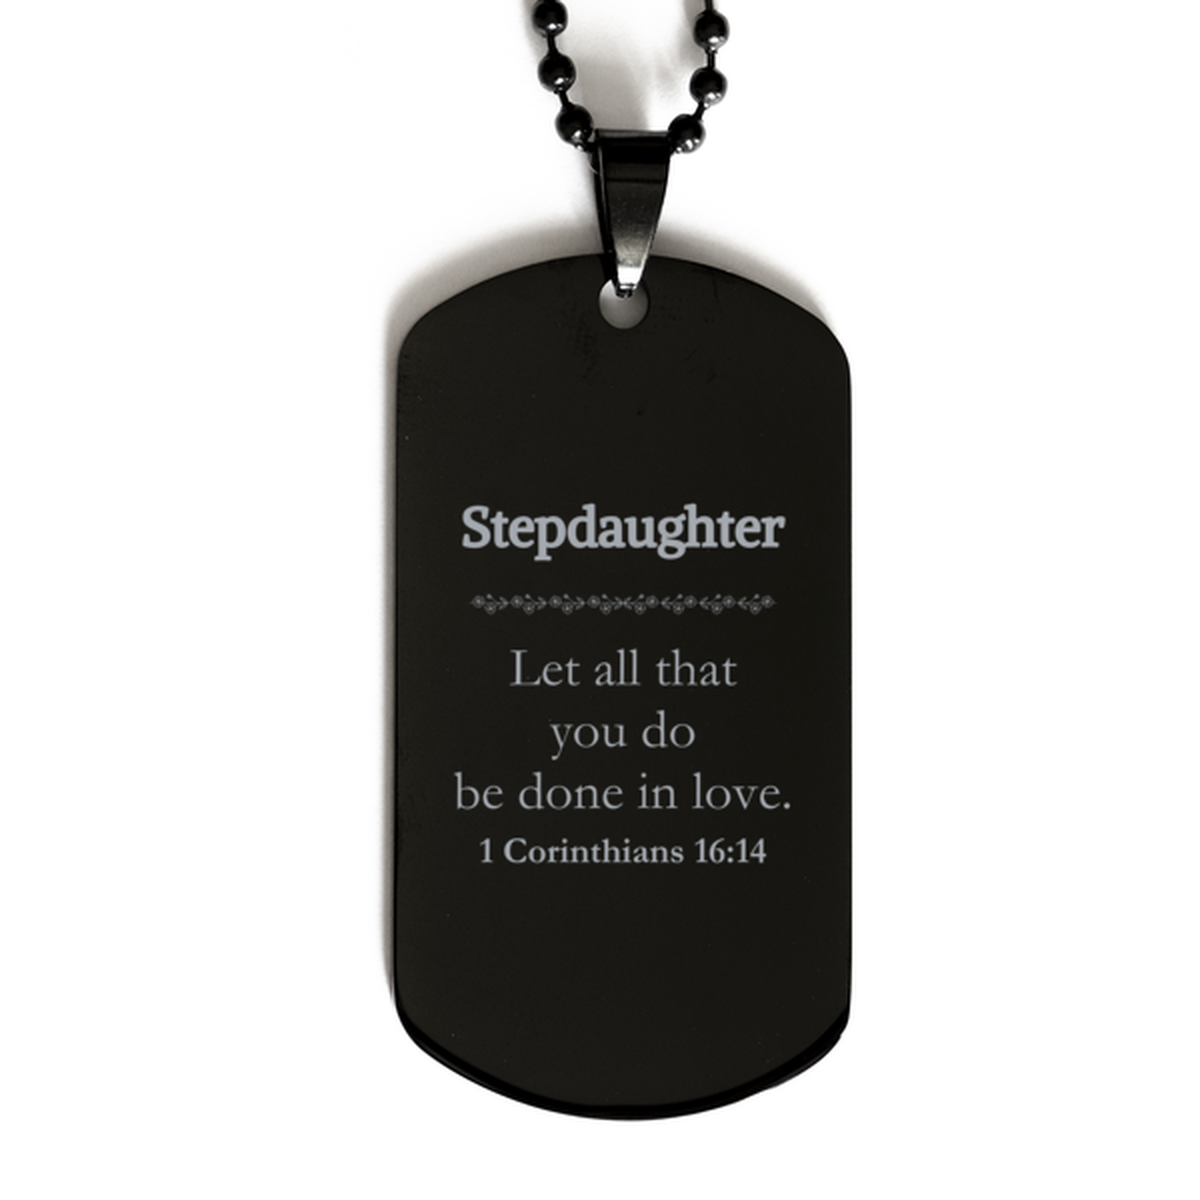 Christian Stepdaughter Gifts, Let all that you do be done in love, Bible Verse Scripture Black Dog Tag, Baptism Confirmation Gifts for Stepdaughter